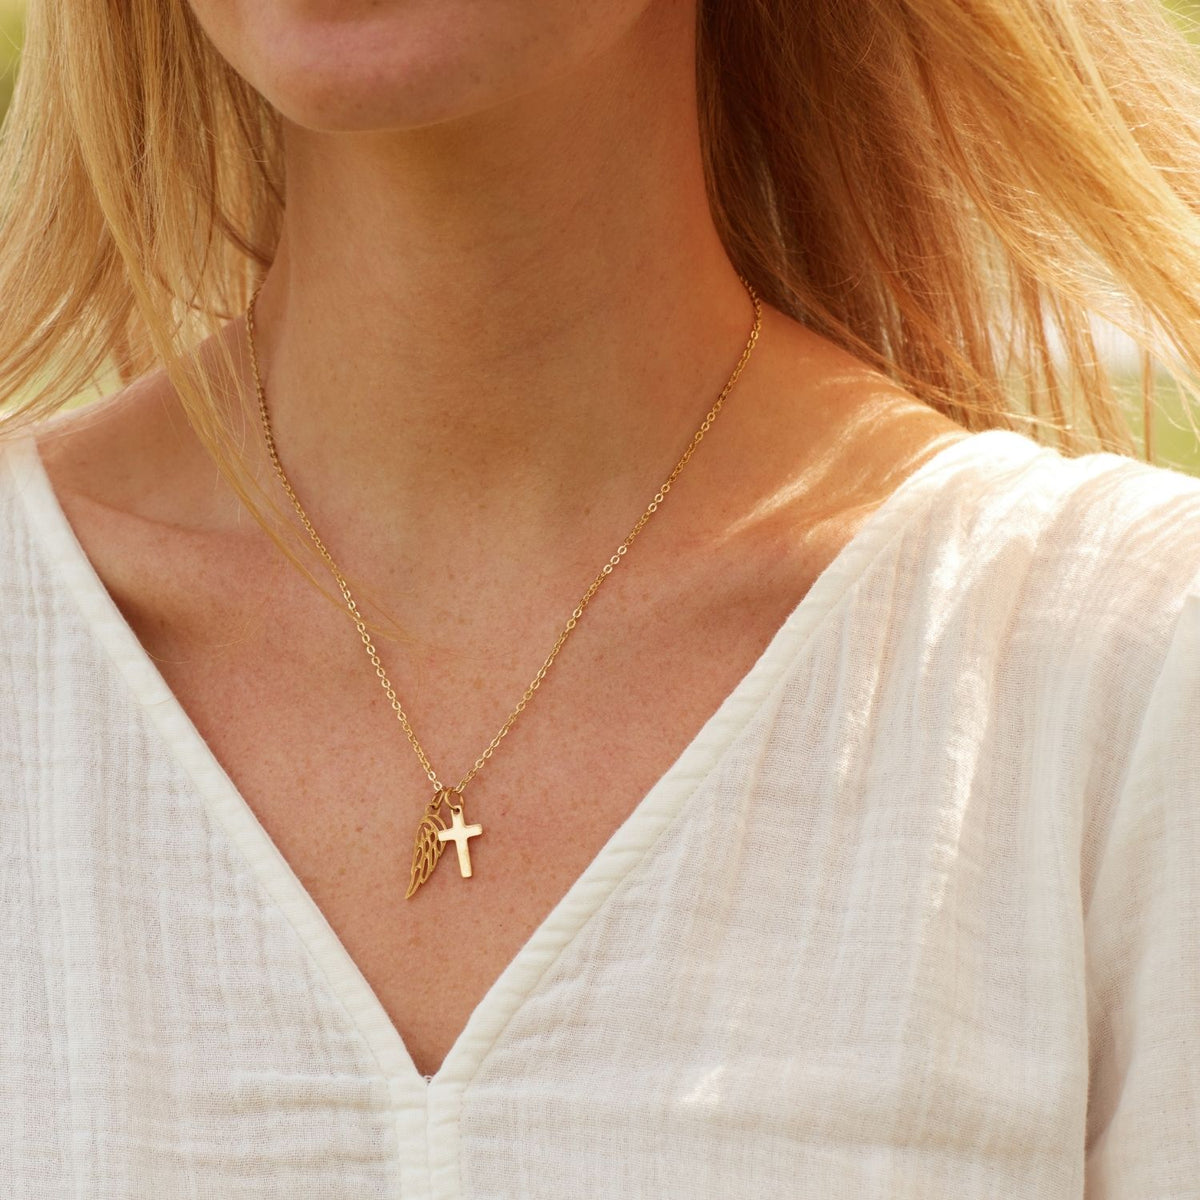 Gift for Cancer Inspiration | The Heart of a Warrior | Cross Necklace